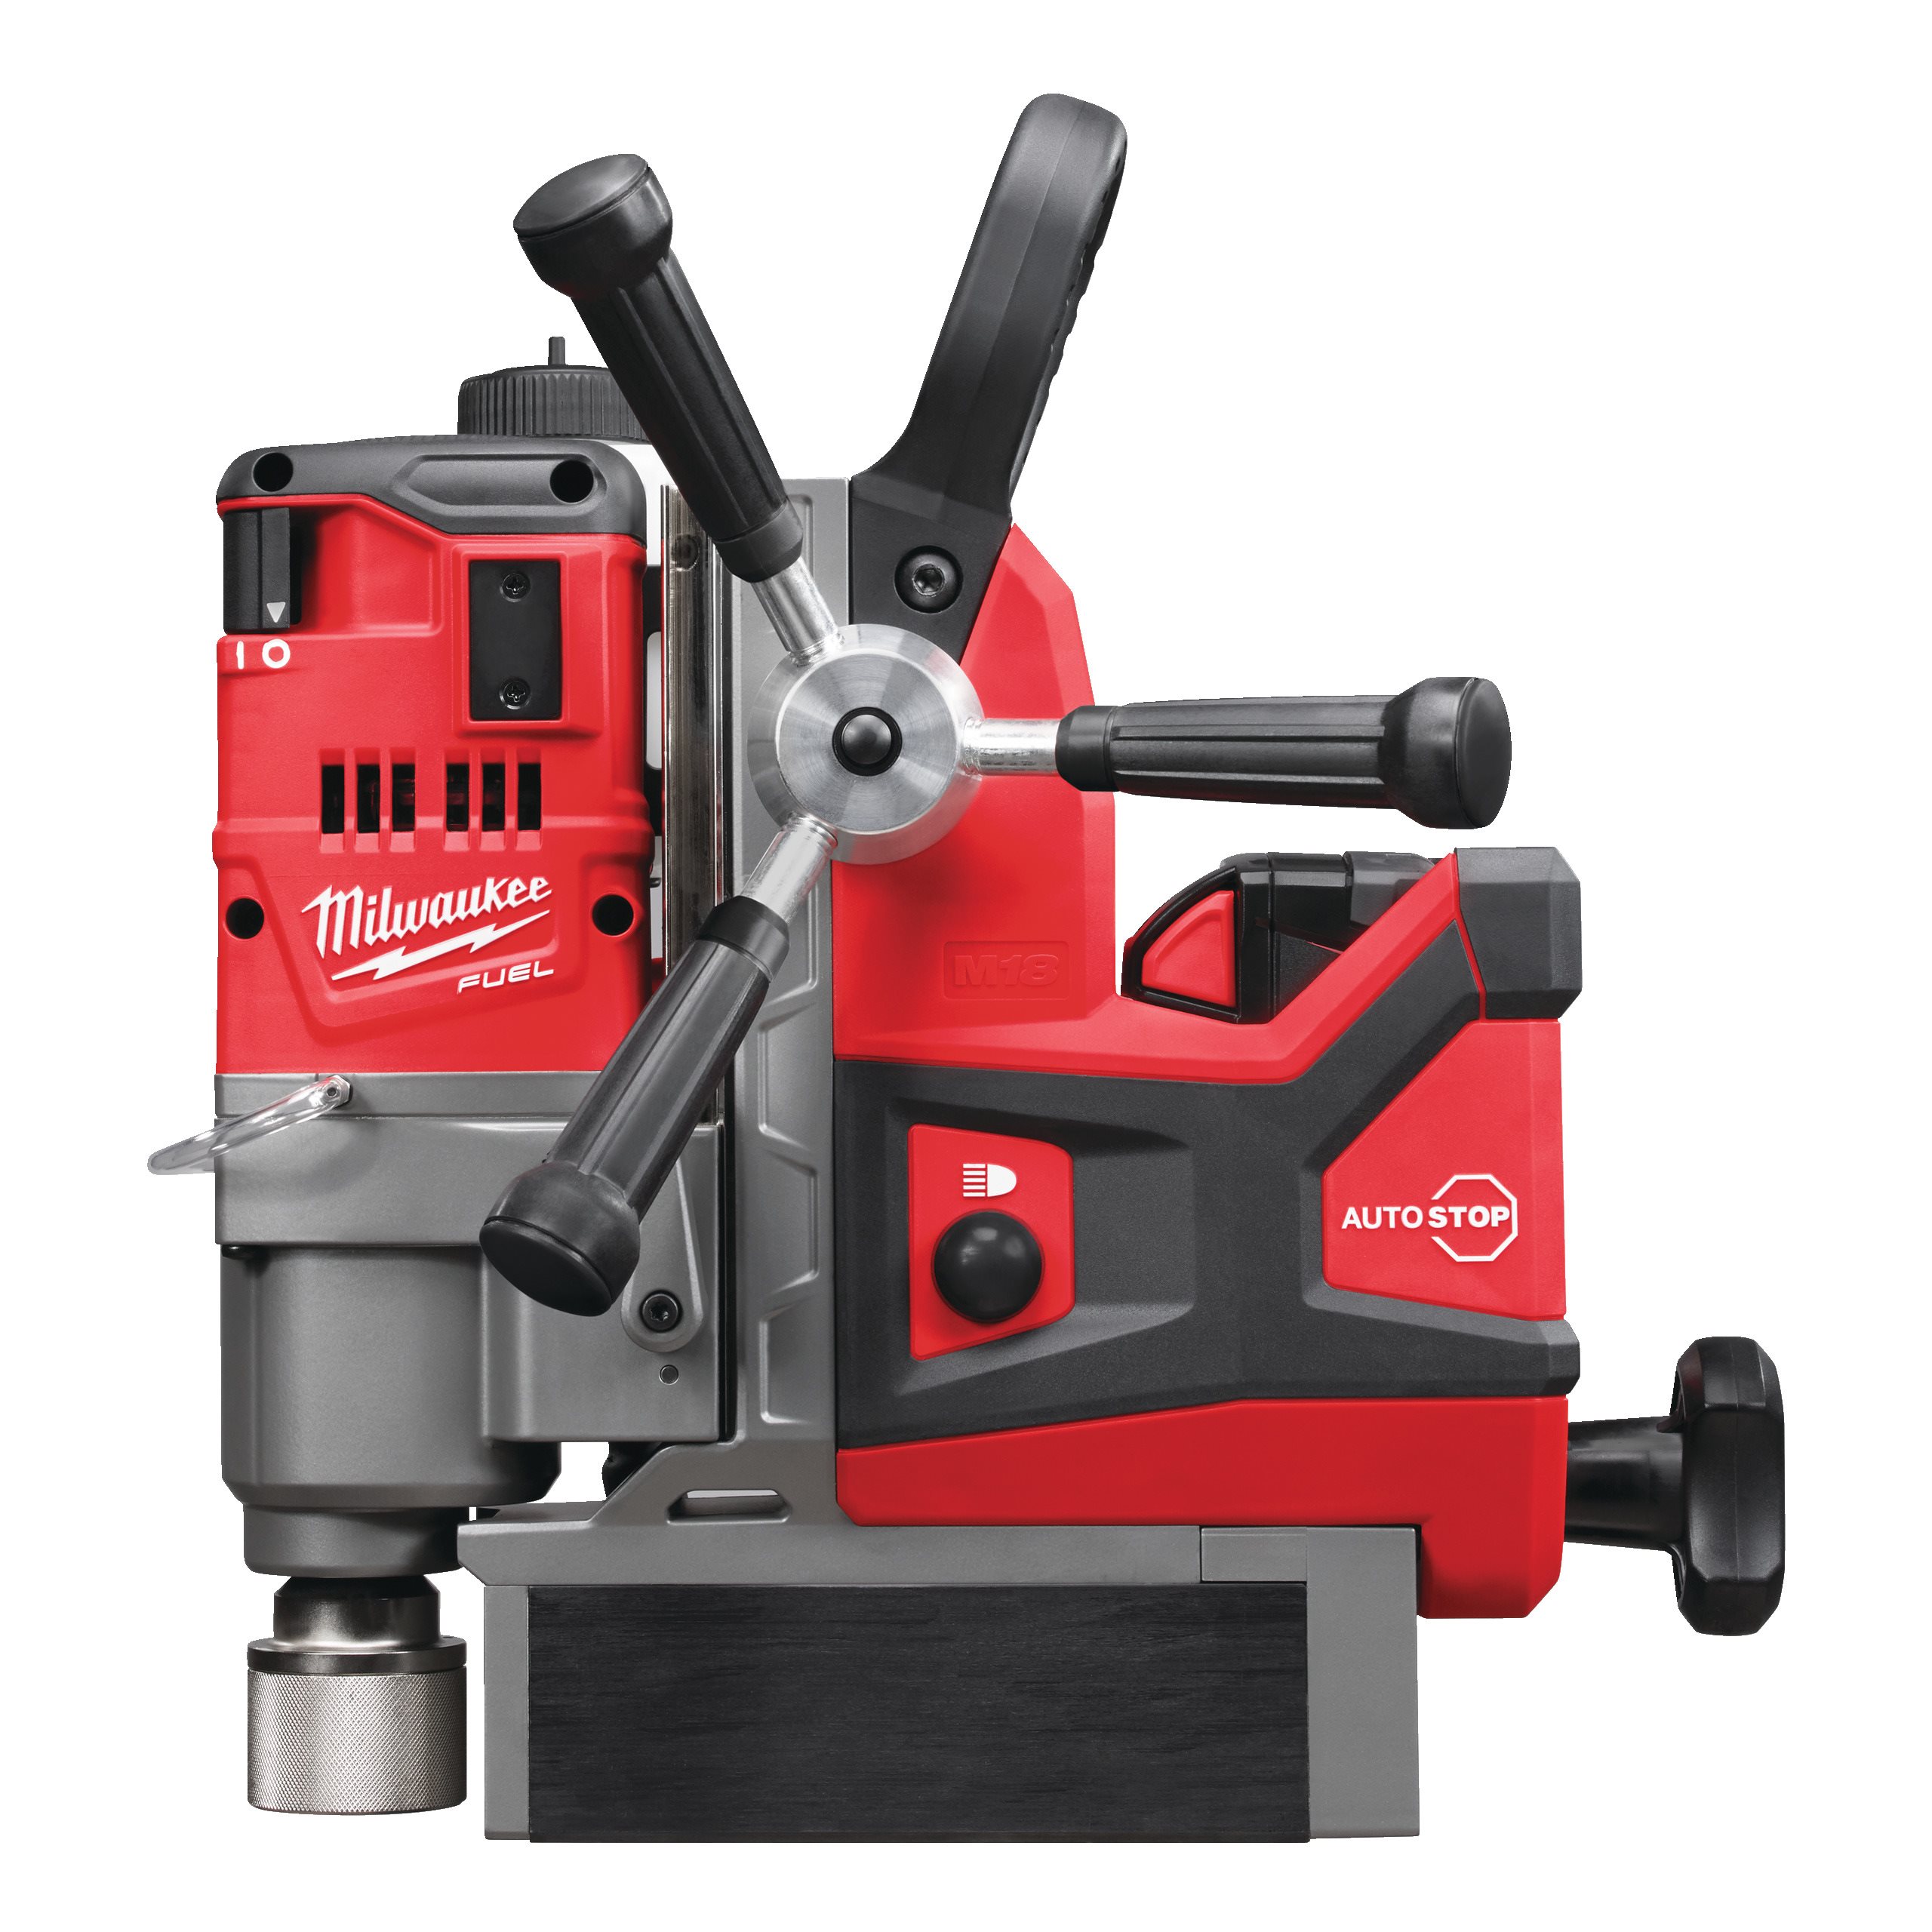 Cordless Magnetic Drill Presses